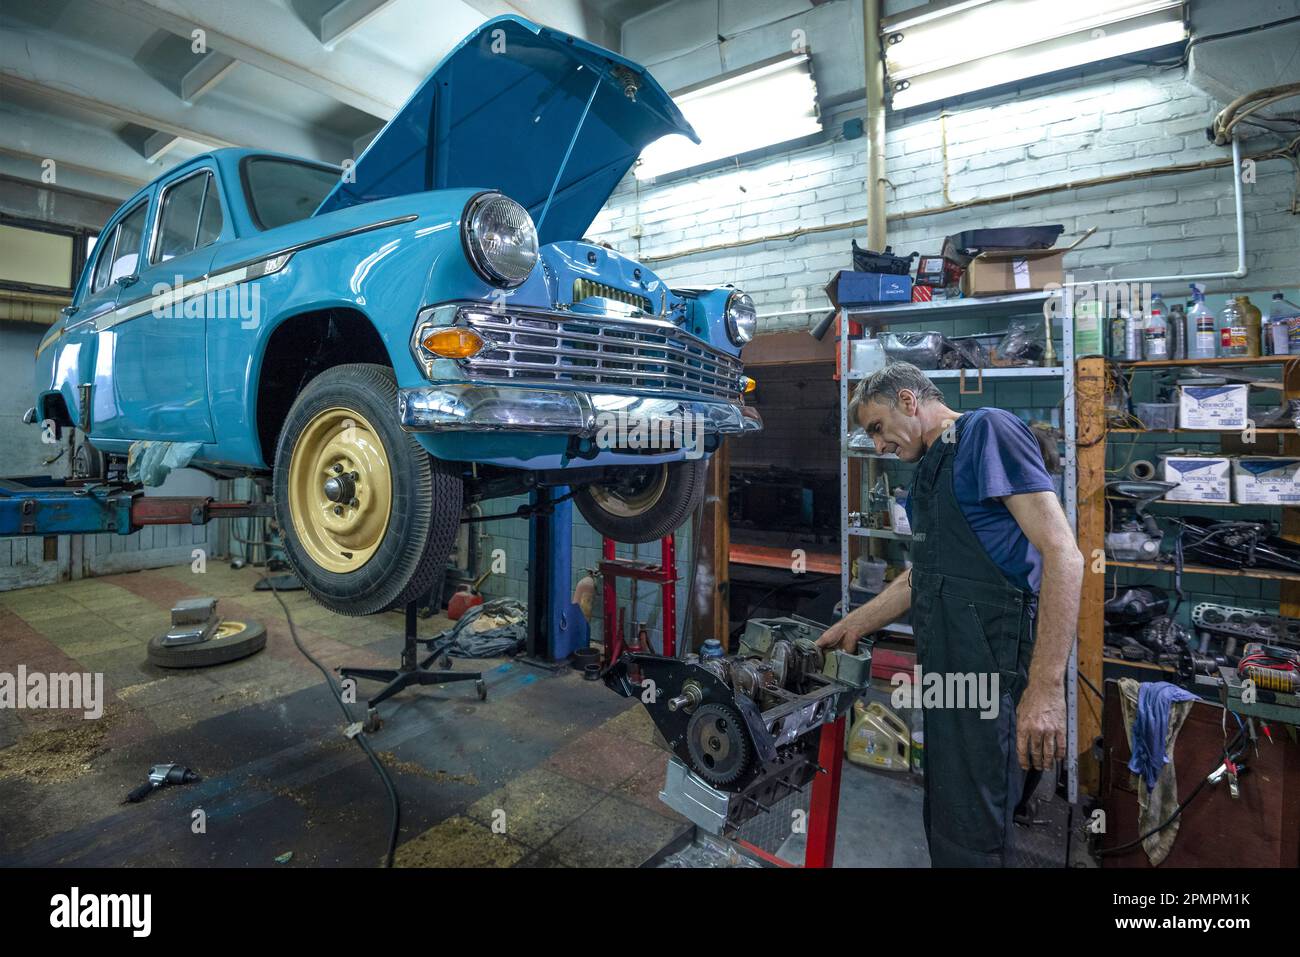 ST. PETERSBURG, RUSSIA - AUGUST 03, 2020: Car mechanic in the garage repairs the engine of the Soviet retro car Moskvich-403 Stock Photo